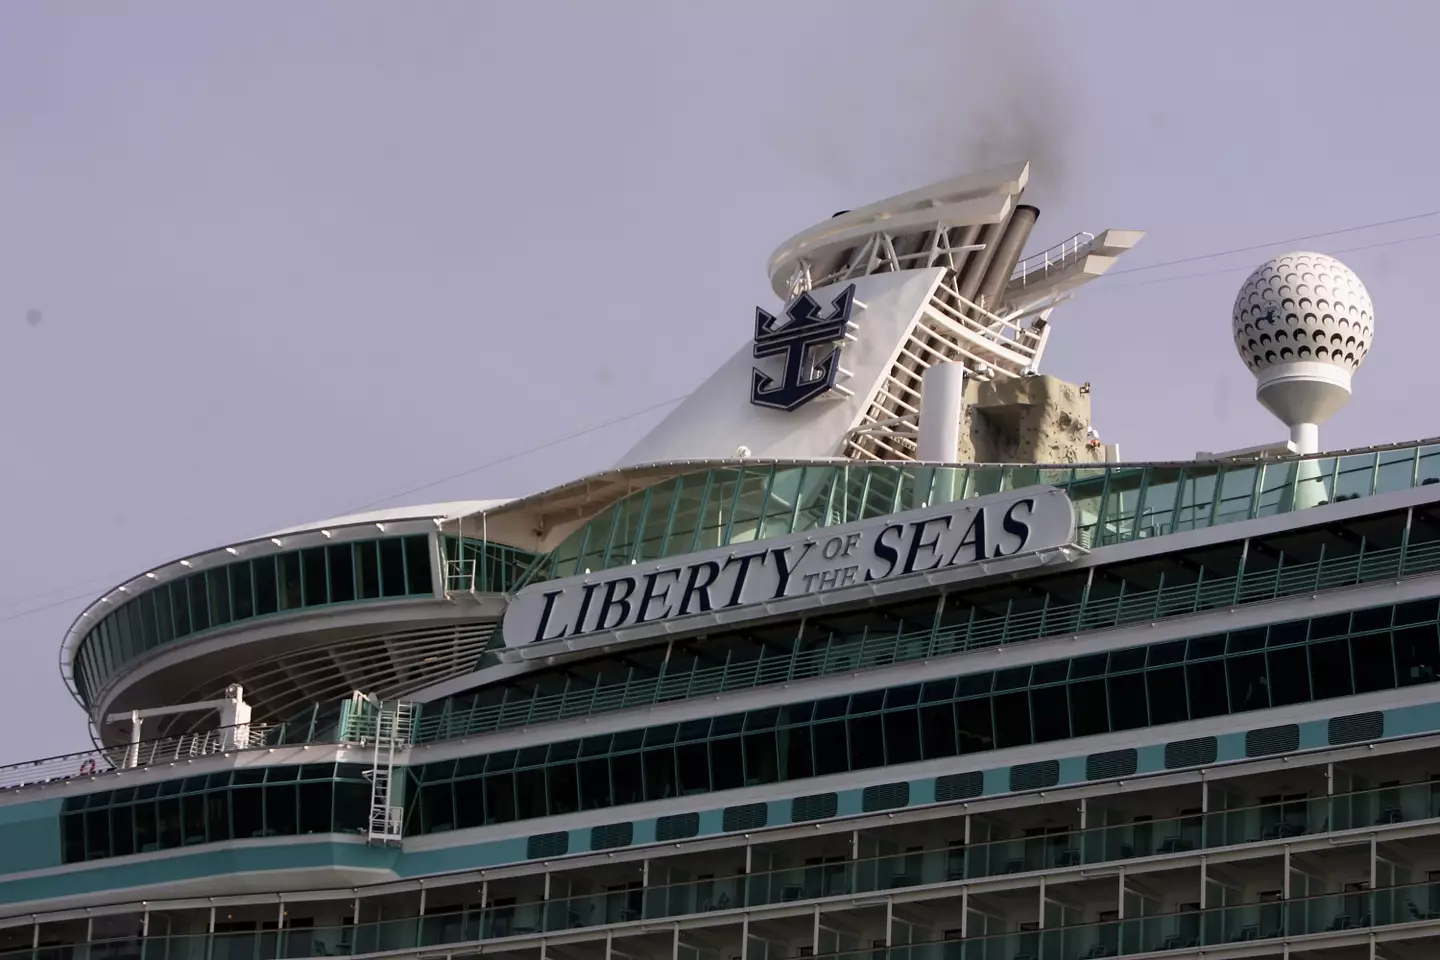 The incident occurred on the Royal Caribbean's Liberty of the Seas.  (Getty Images/ Bruno Vincent)